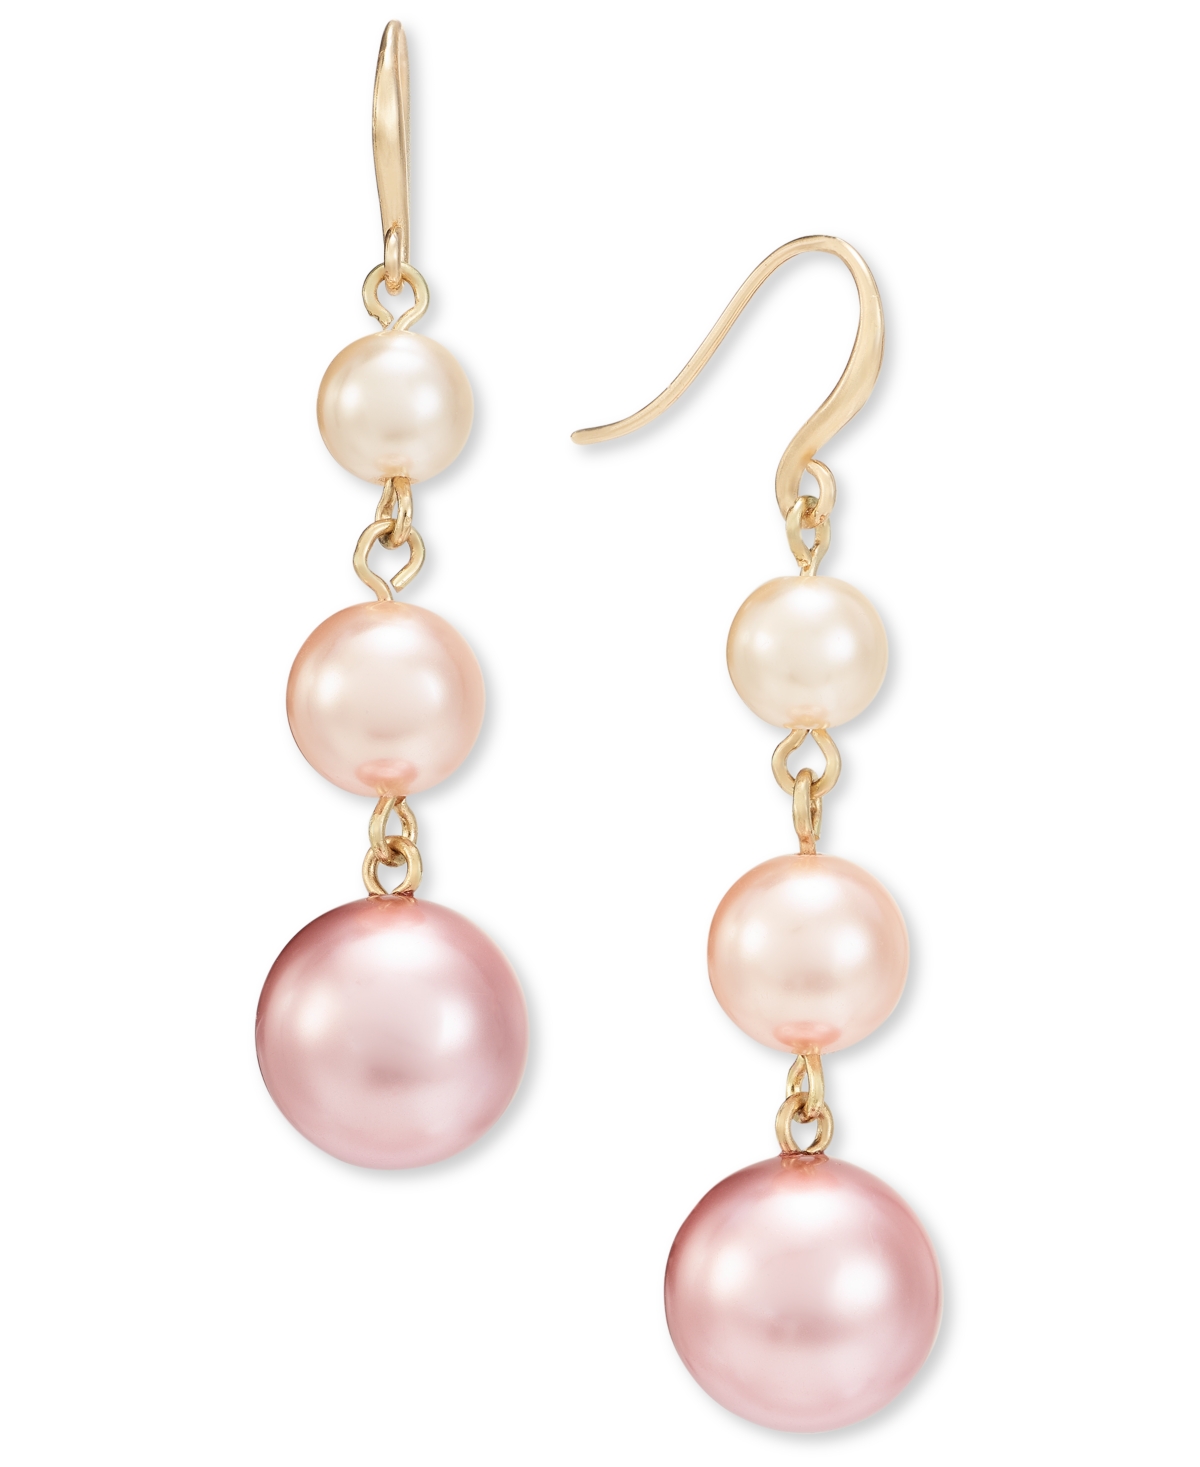 Gold-Tone Imitation Pearl Ombre Drop Earrings, Created for Macy's - Multi